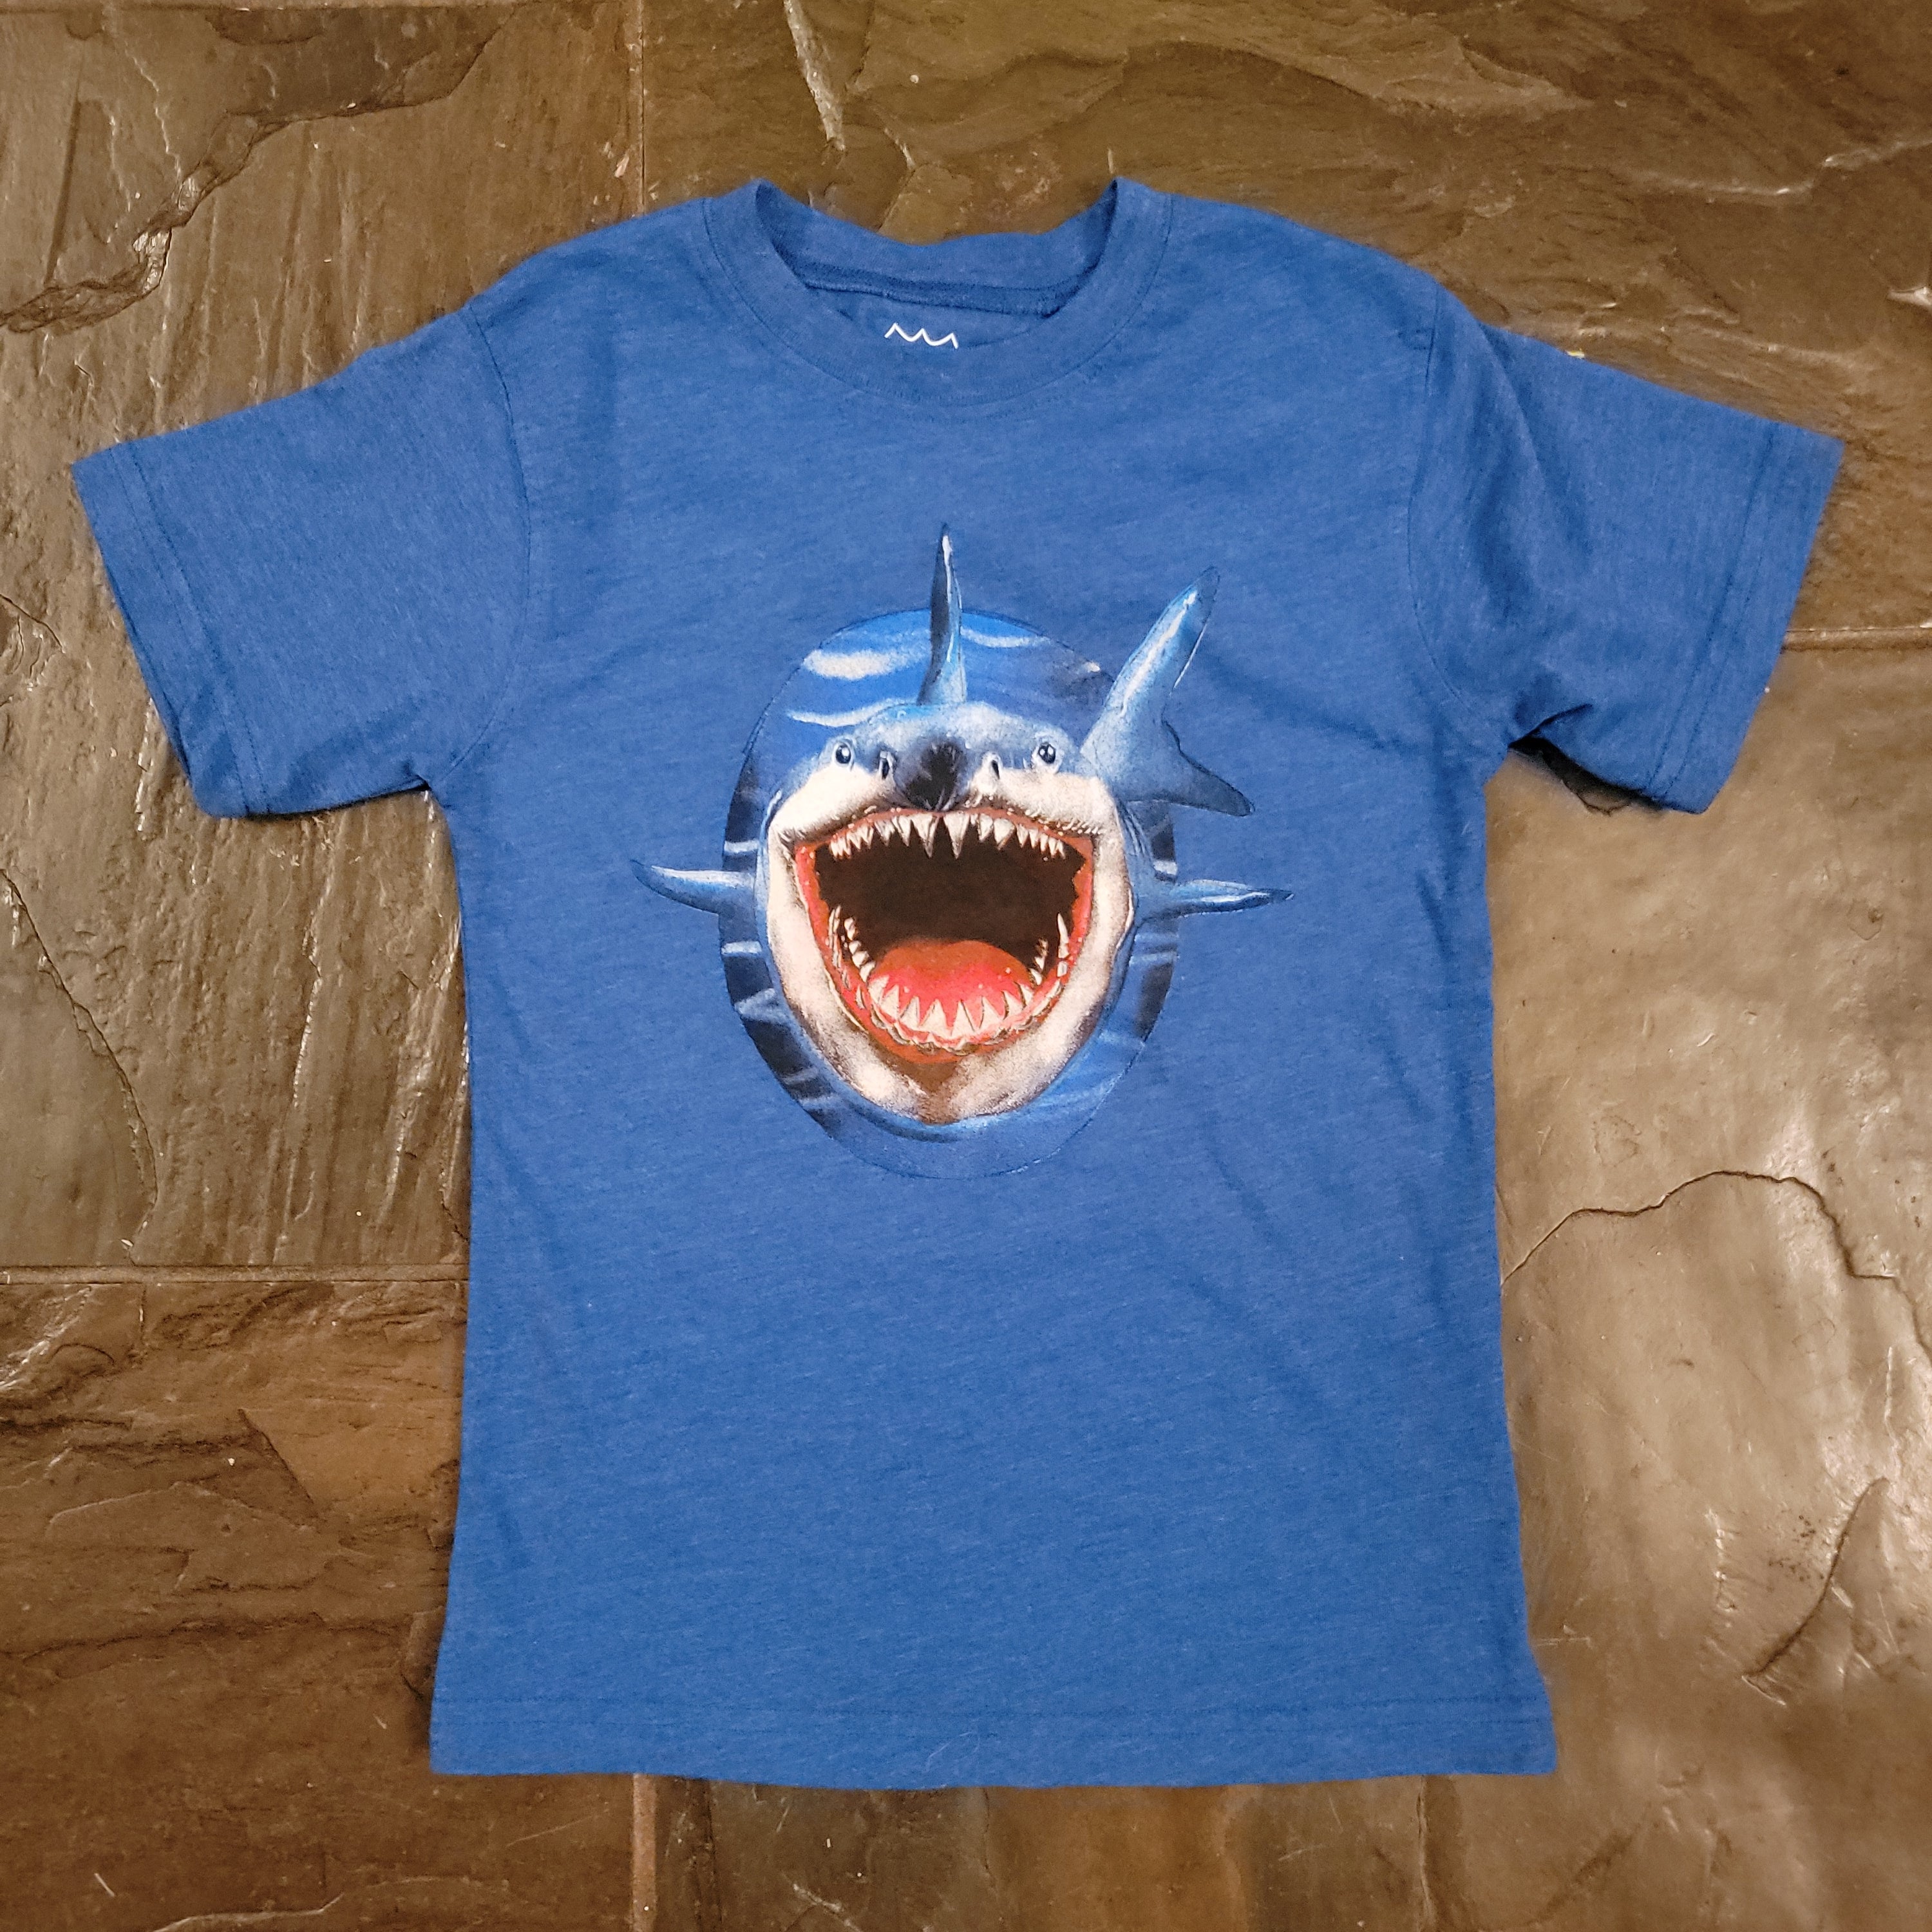 Wes & Willy Shark Bite Short Sleeve Tee - Blue Moon Blend-WES & WILLY-Little Giant Kidz